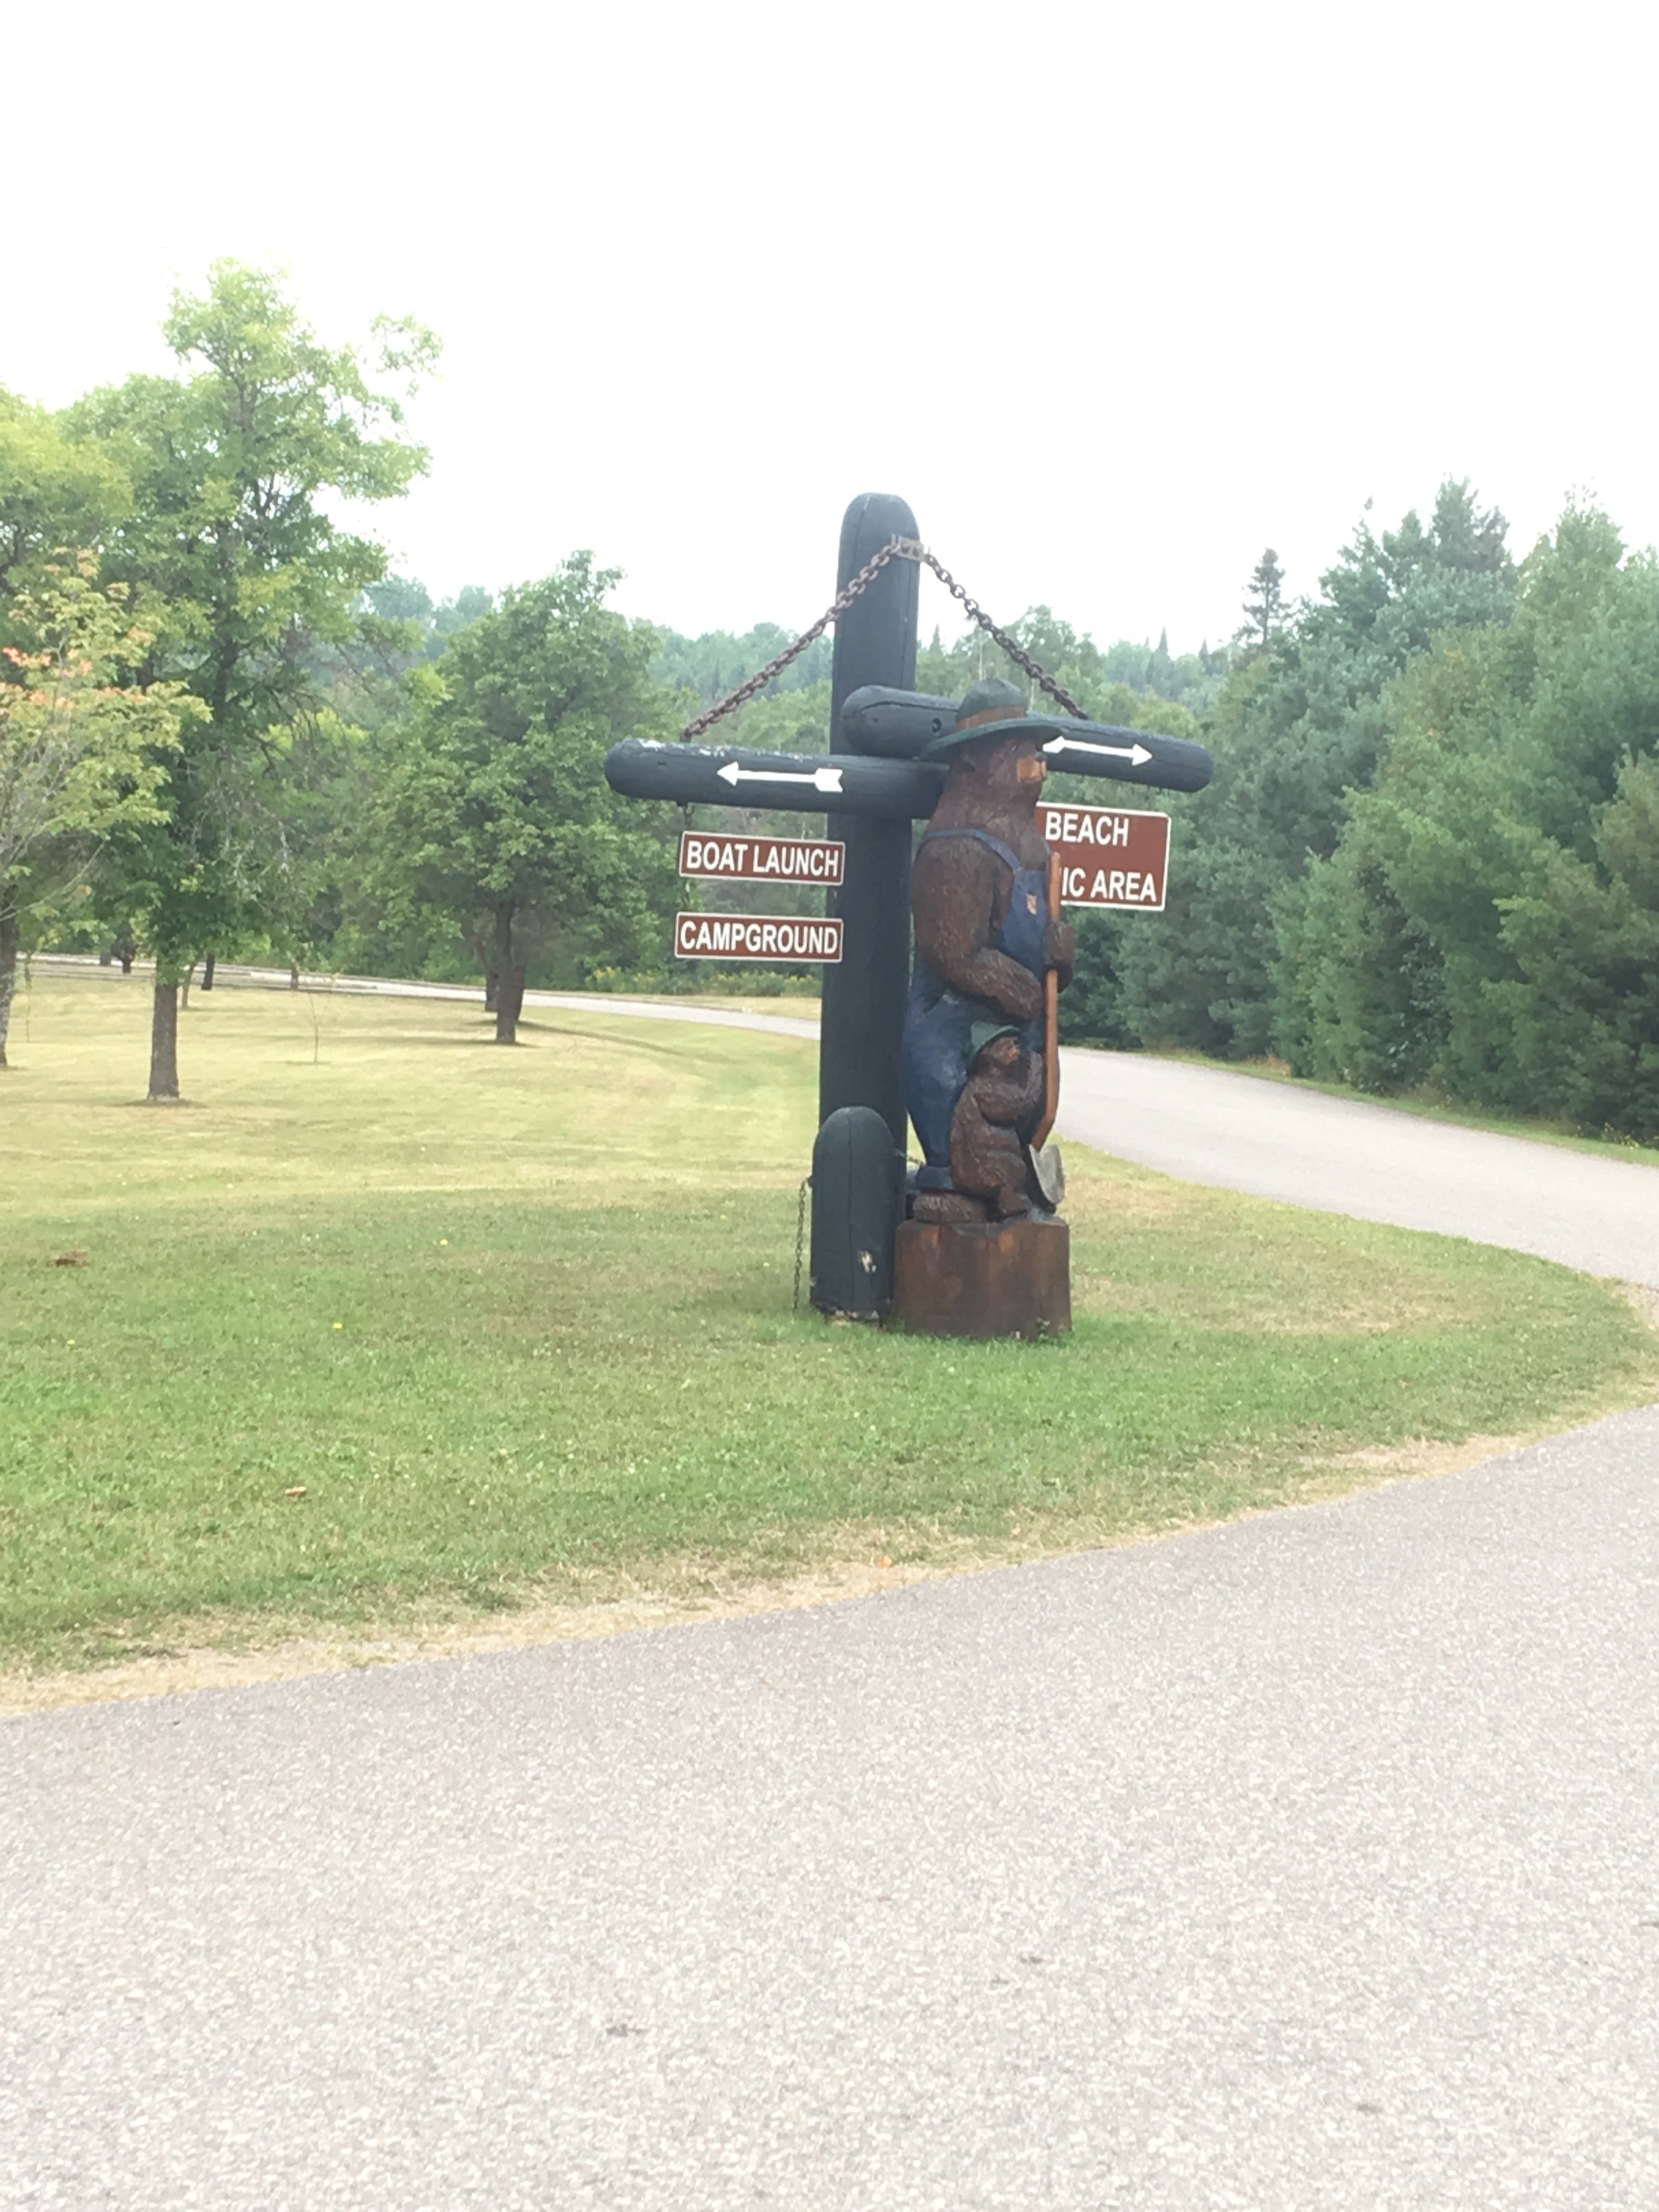 Campground and park entrance